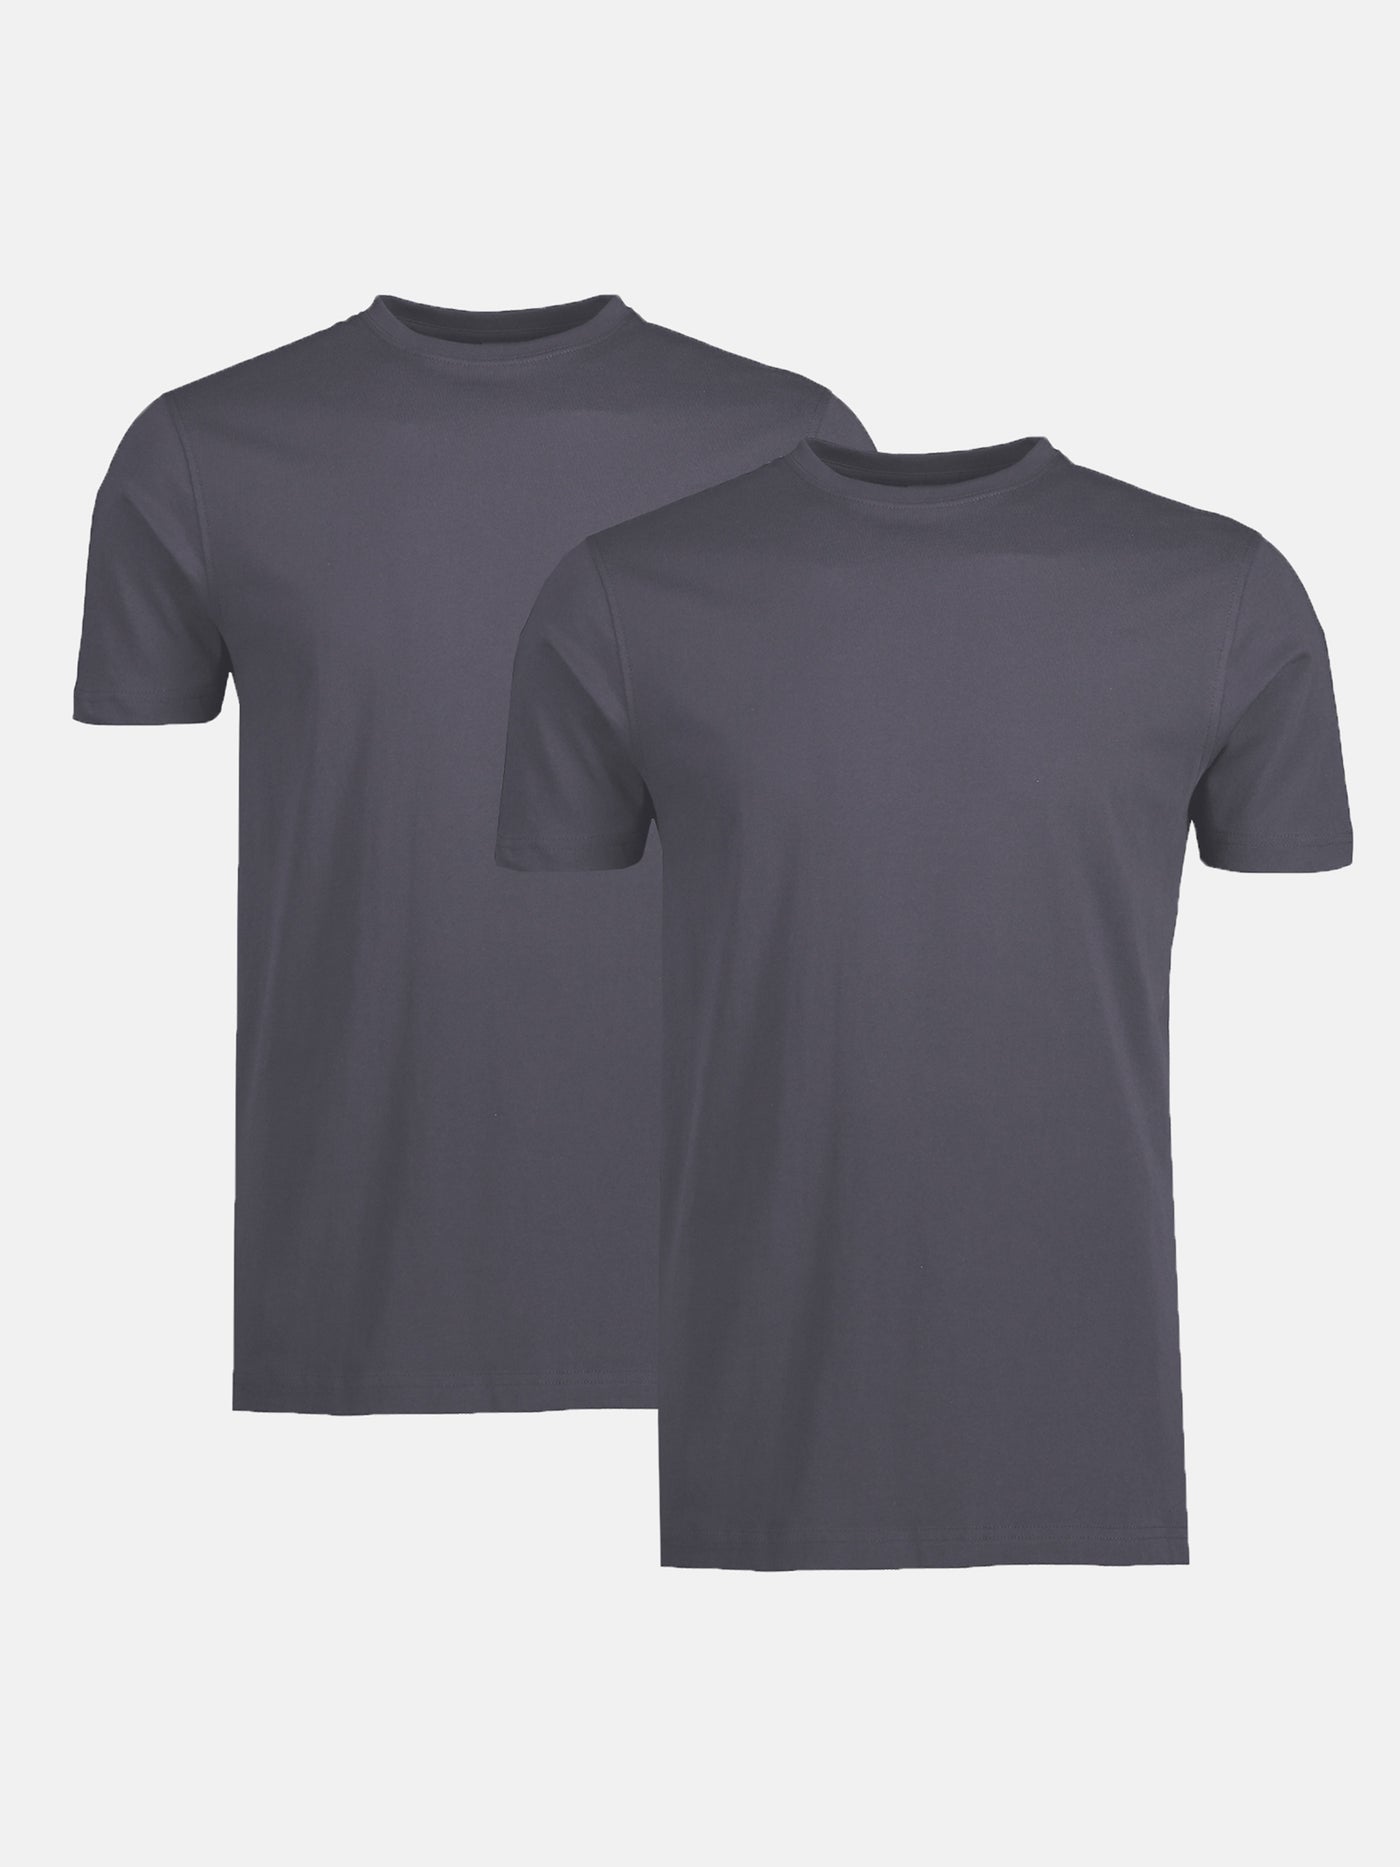 Double pack of round-neck t-shirts in premium cotton quality